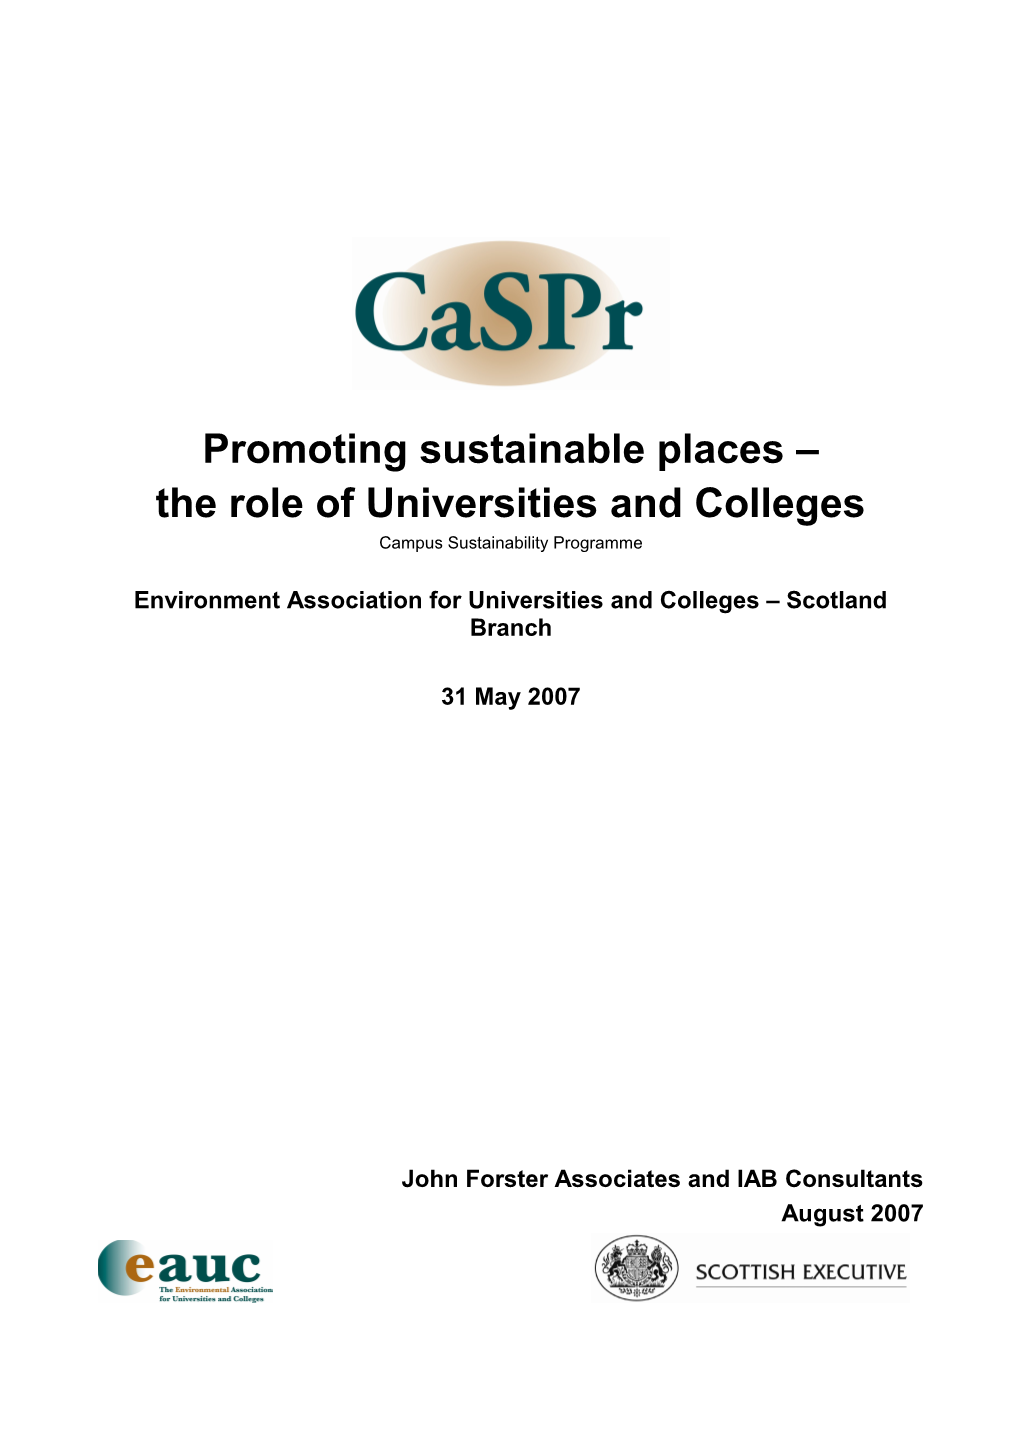 The Role of Universities and Colleges